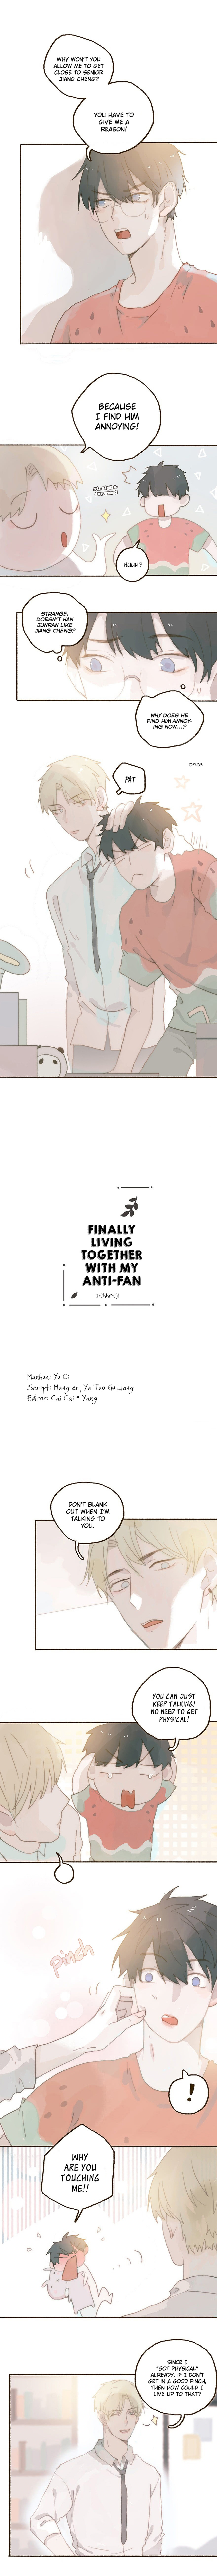 Finally Living Together with my Anti Fan Ch. 30 Stop, Han Junran!